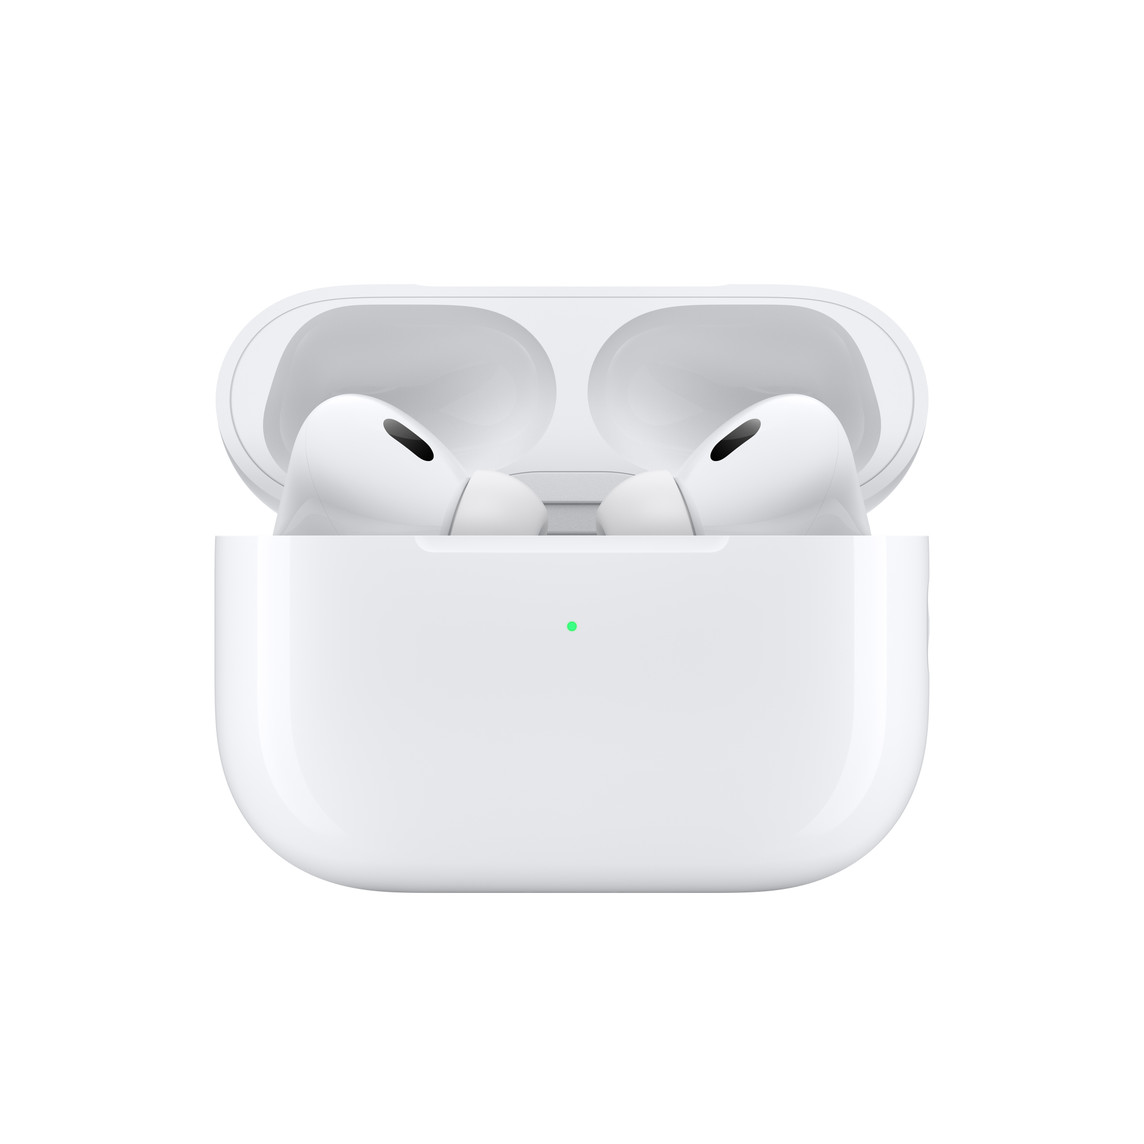 APPLE AIRPODS PRO 2nd GEN WITH MAGSAFE CHARGING CASE (LIGHTNING) MQD83ZM/A